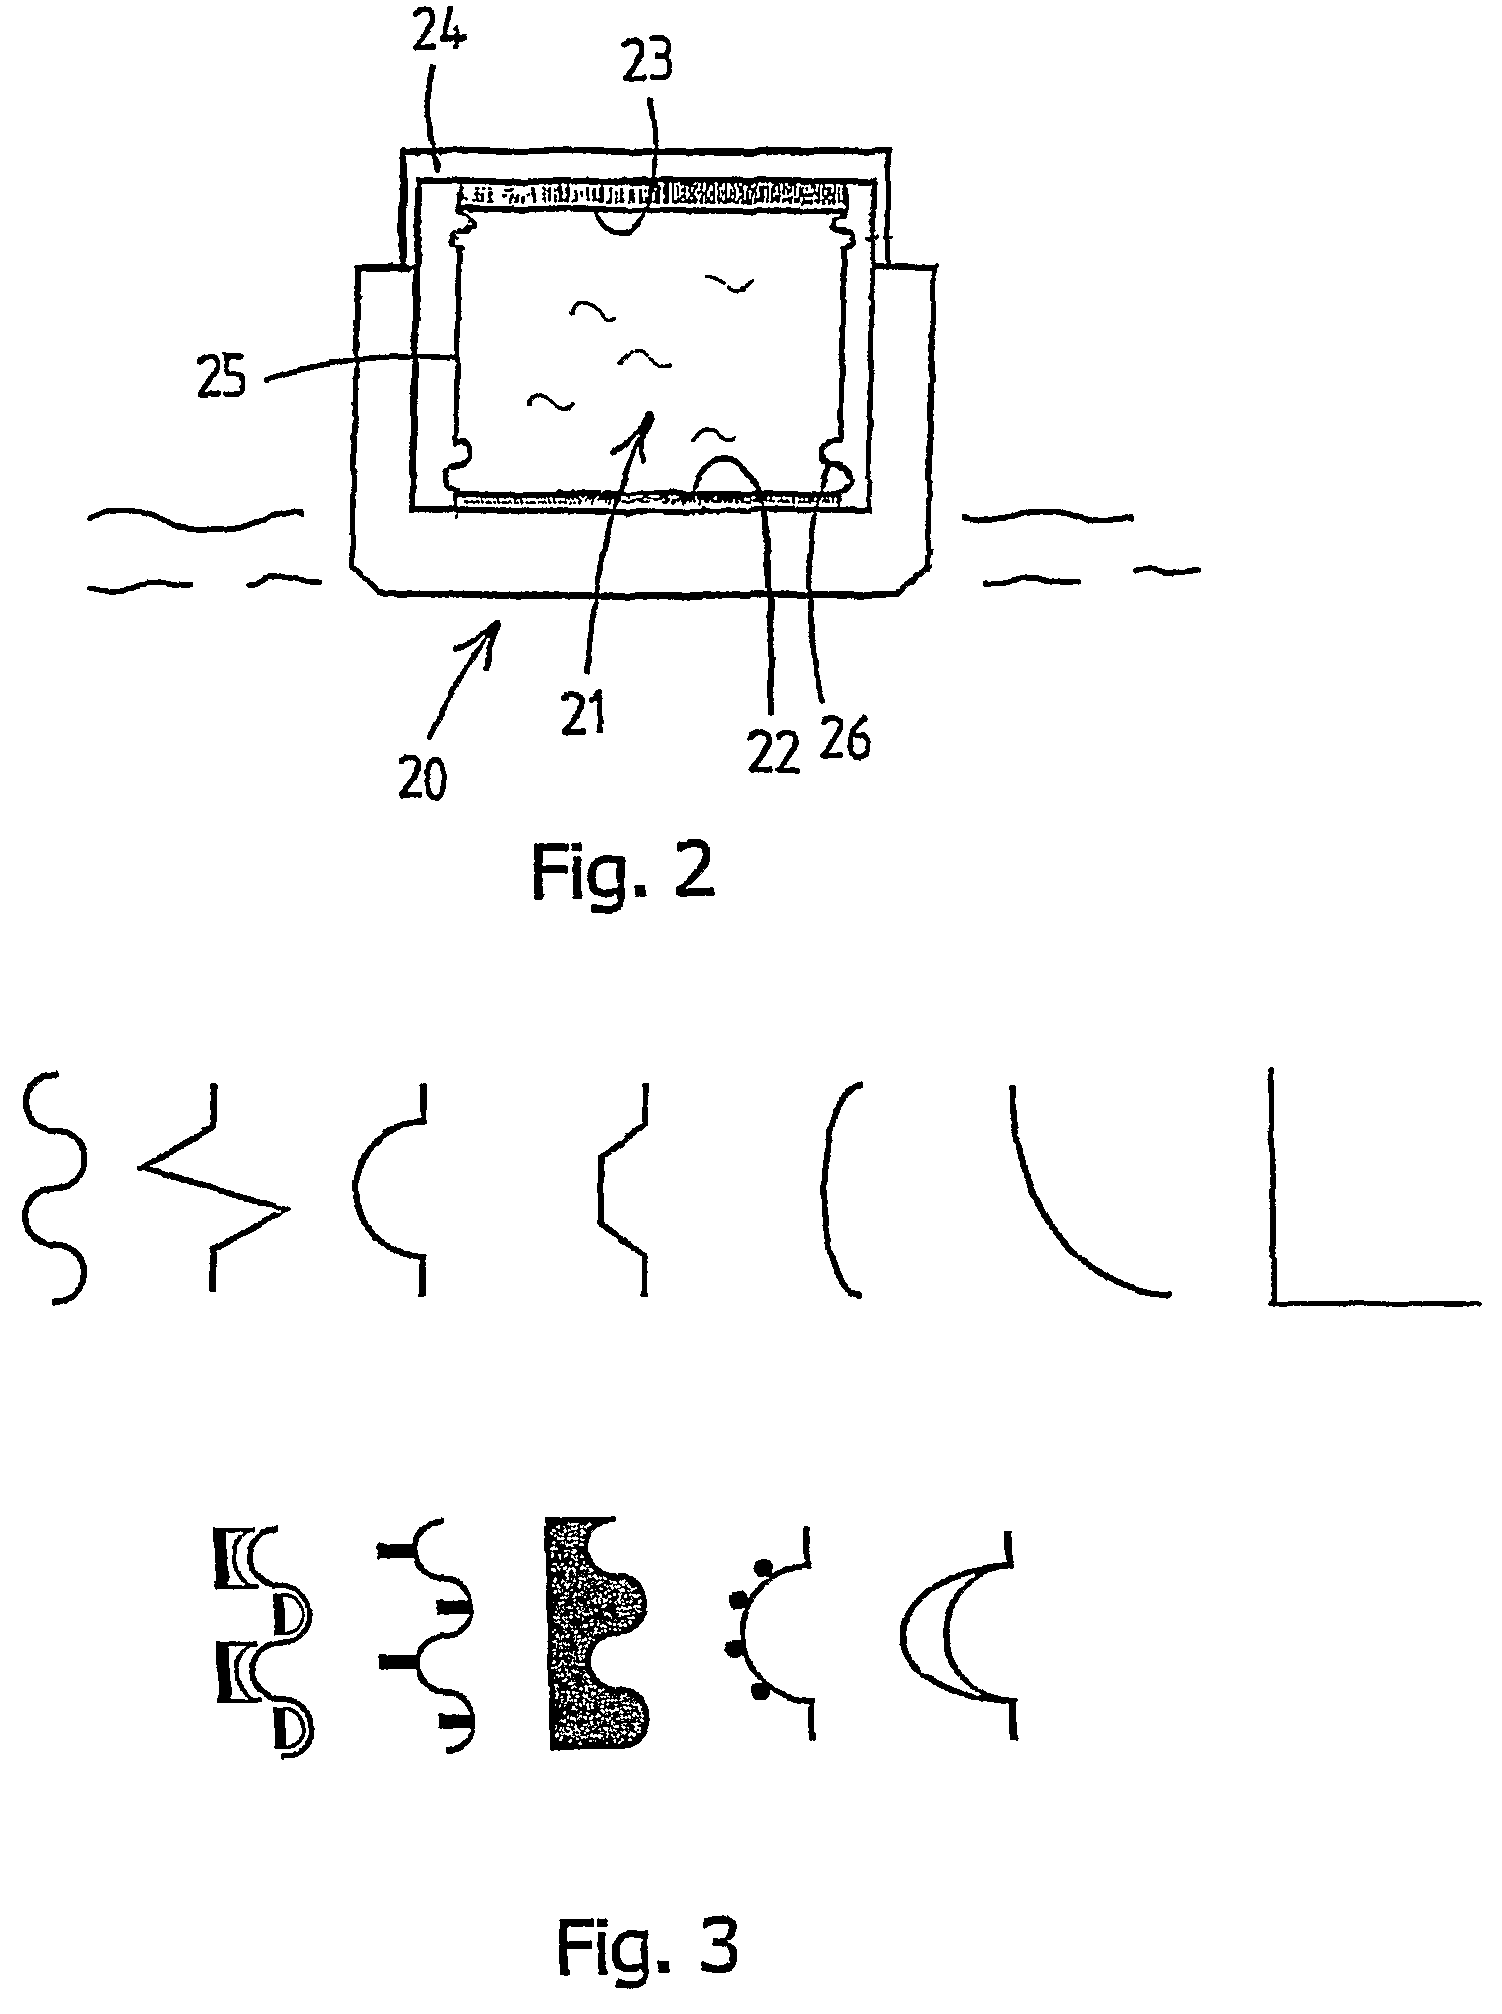 Ship with liquid transport tanks provided with deformation absorbers